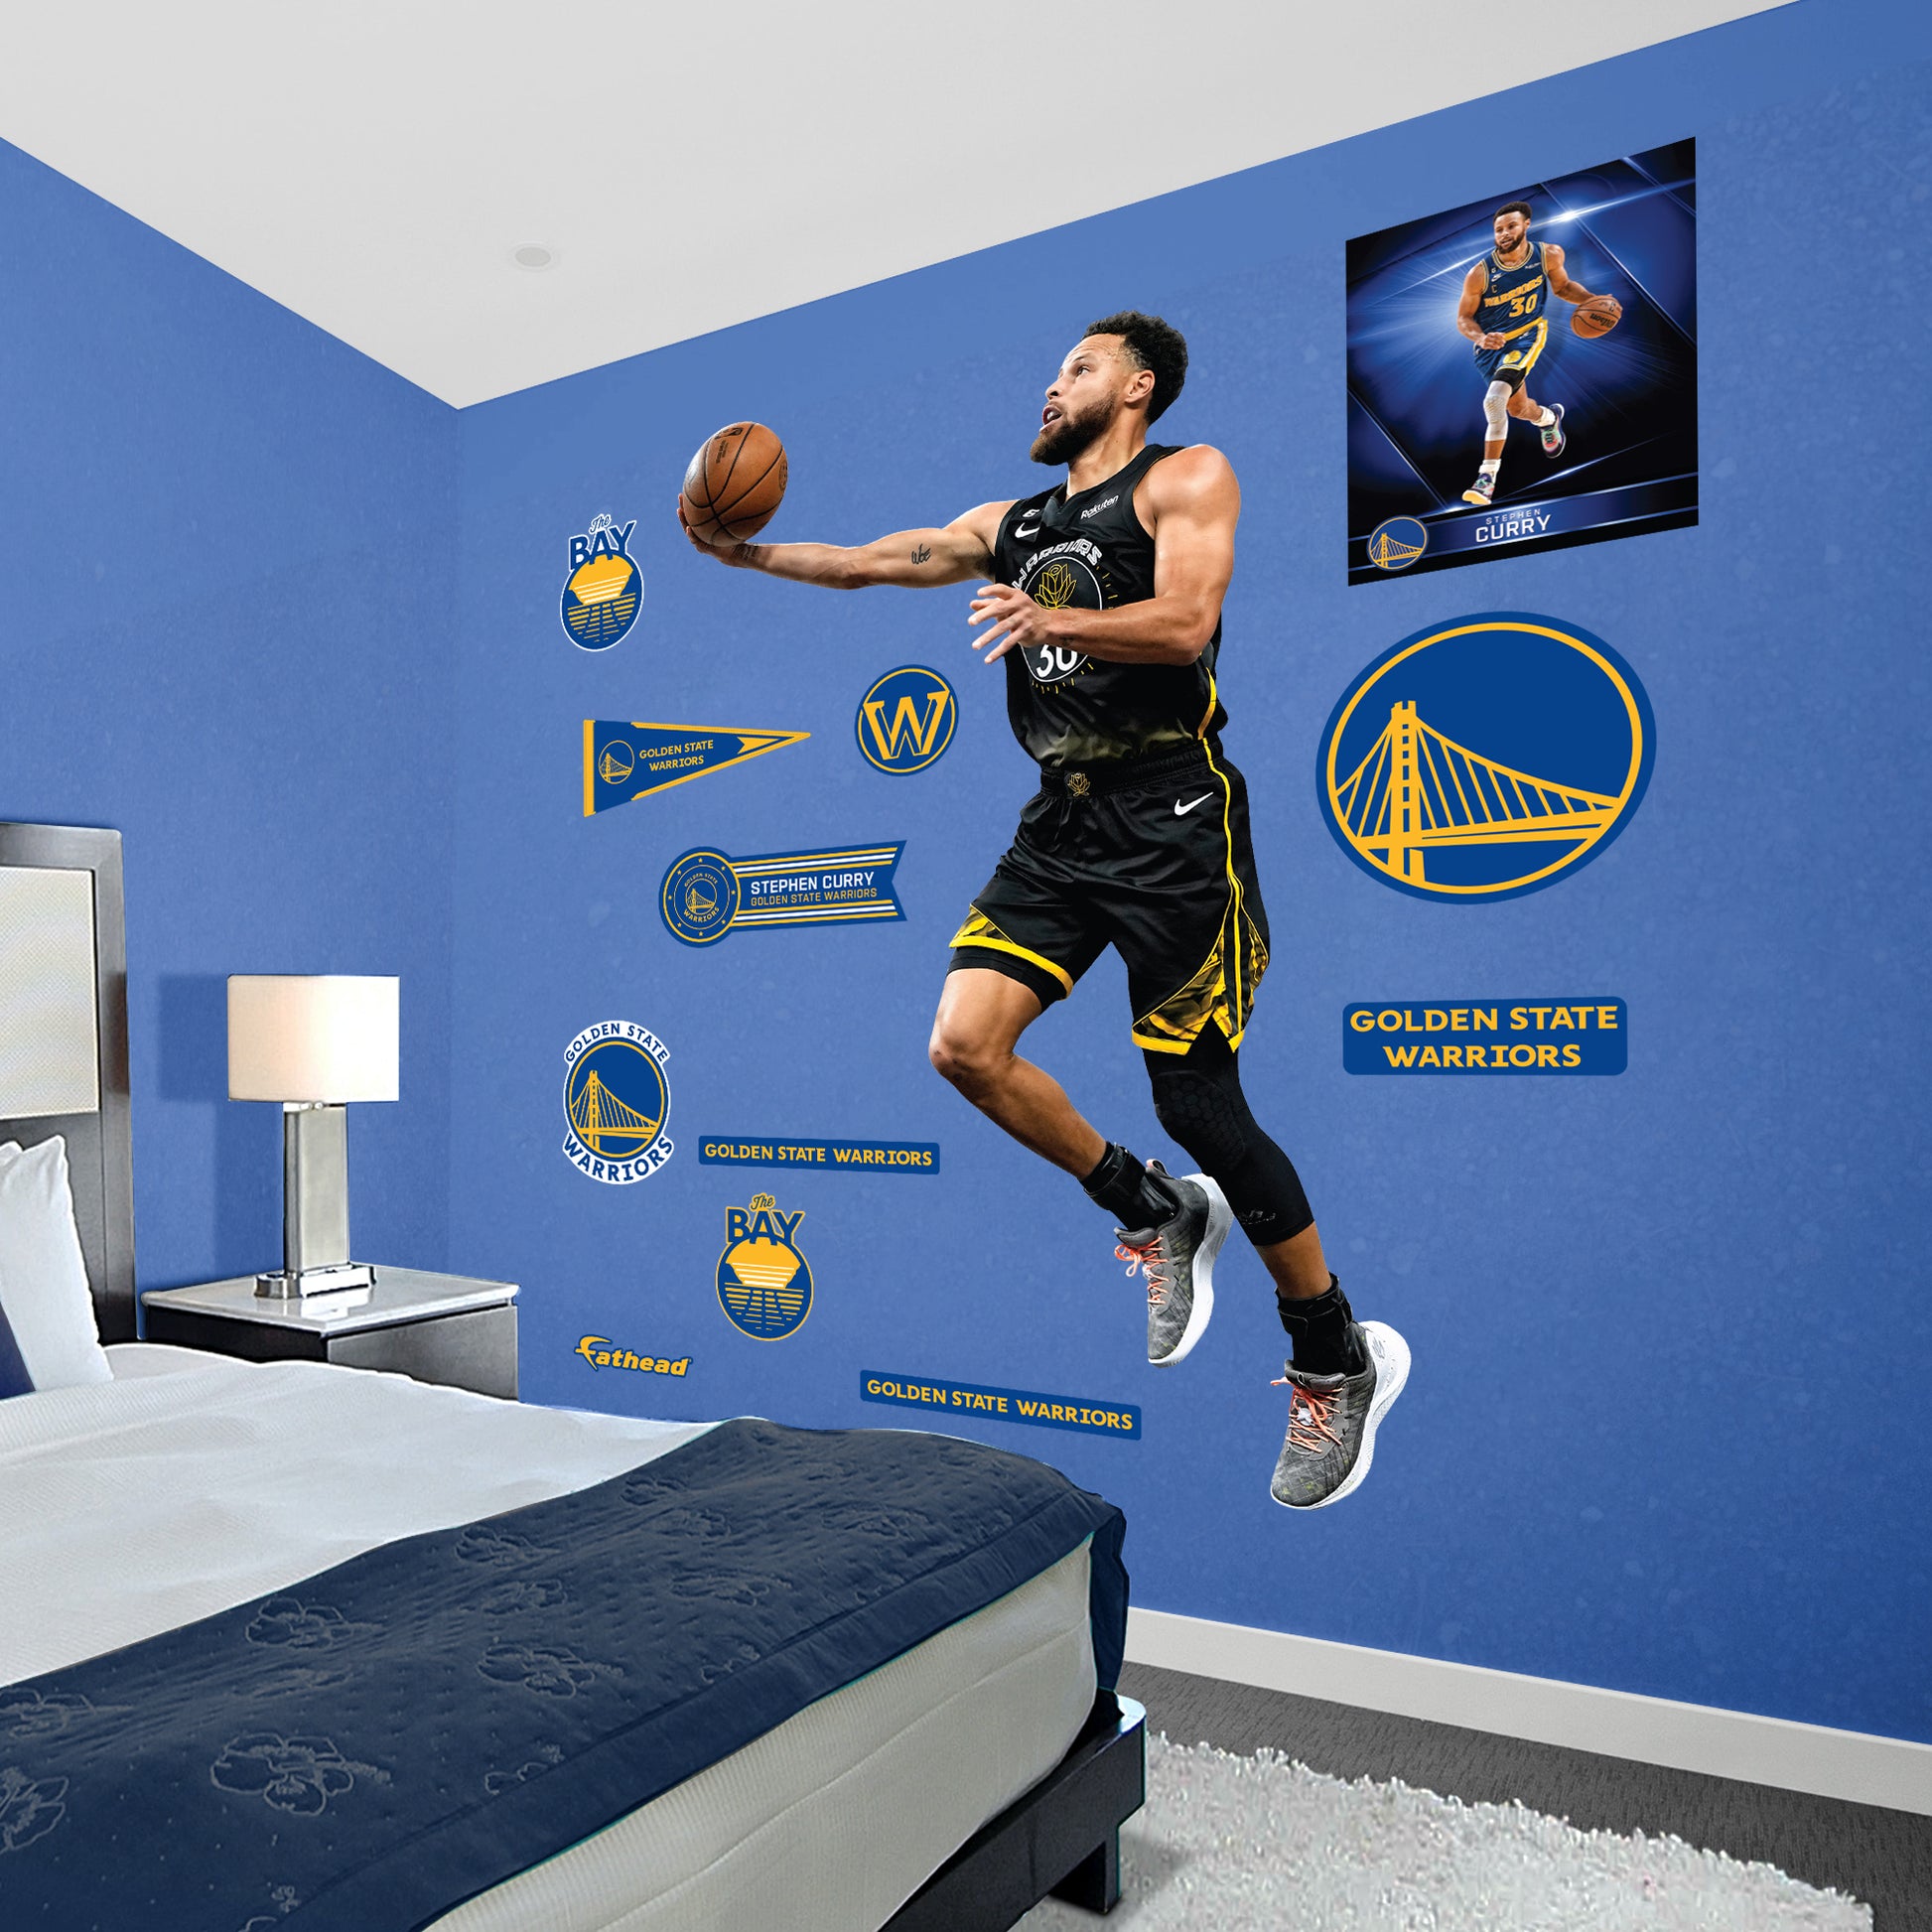 Golden State Warriors: Stephen Curry 2021 Classic Jersey - NBA Removable Adhesive Wall Decal Life-Size Athlete +11 Wall Decals 45W x 75H